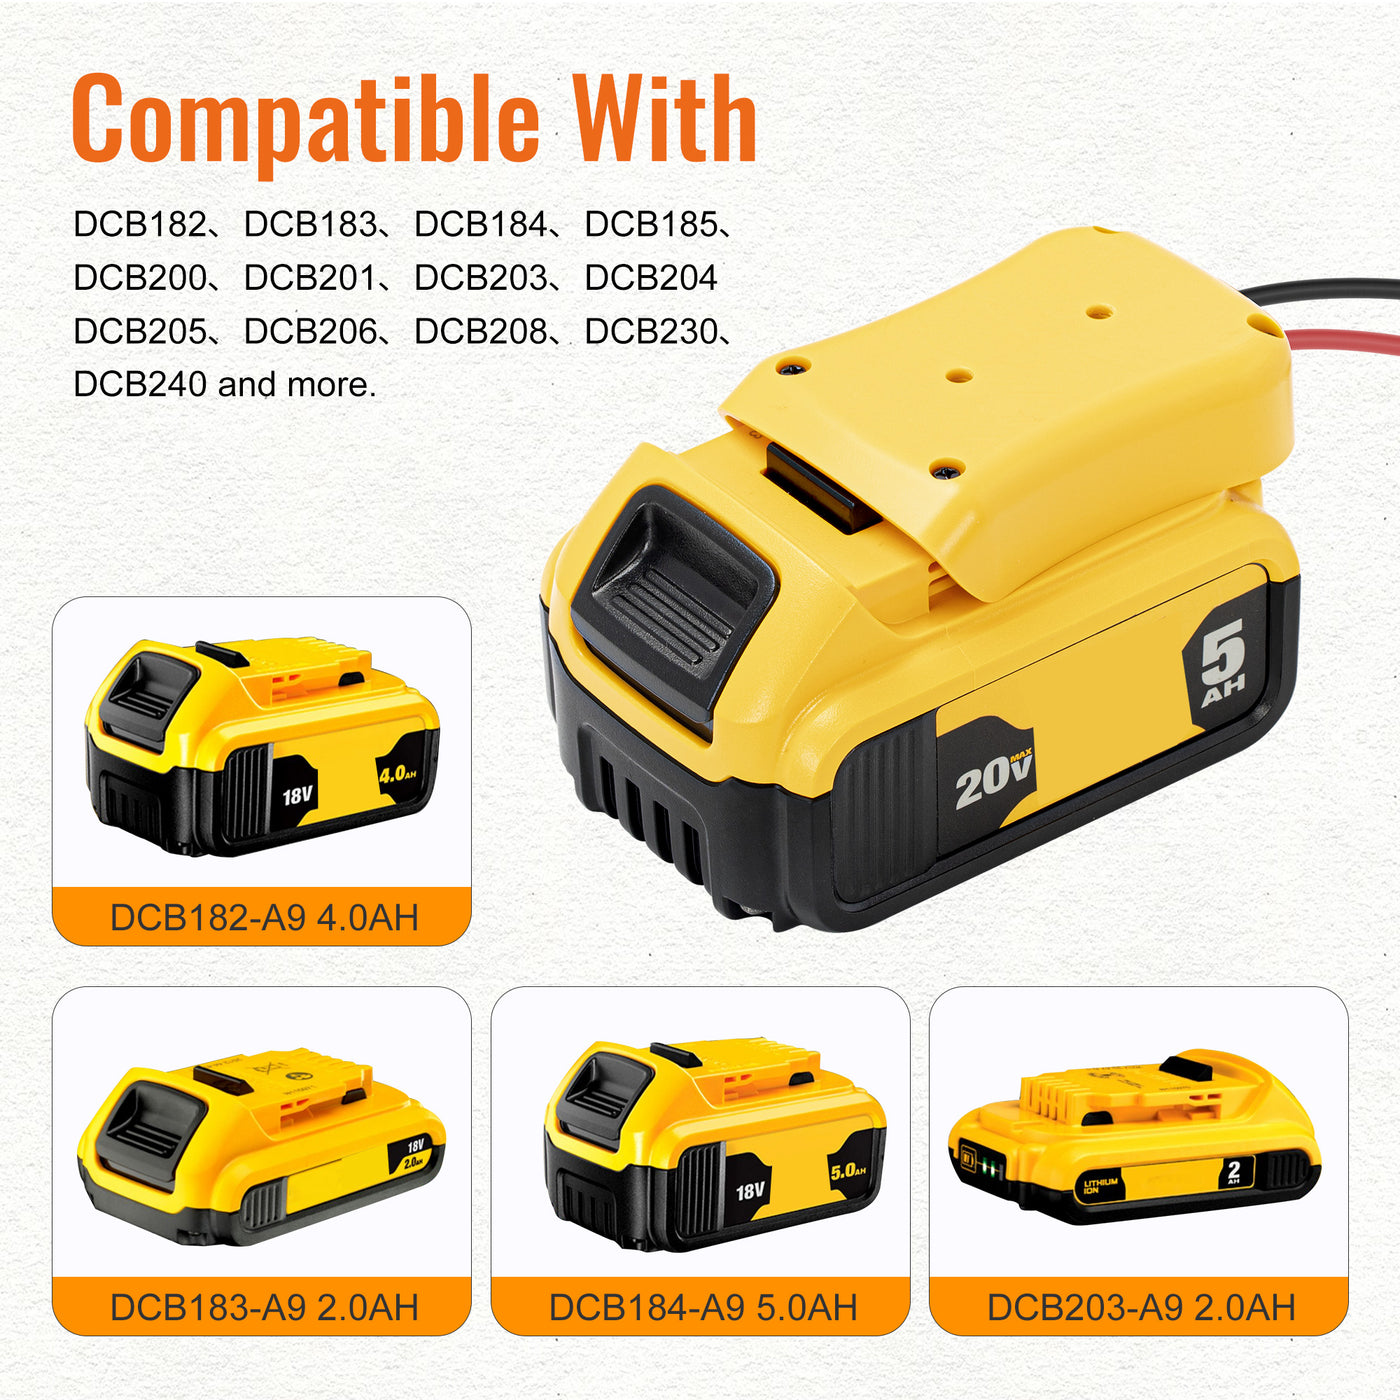 20V Dewalt Power Wheels Adapter with Wire Harness Connector - Fisher-Price Compatible